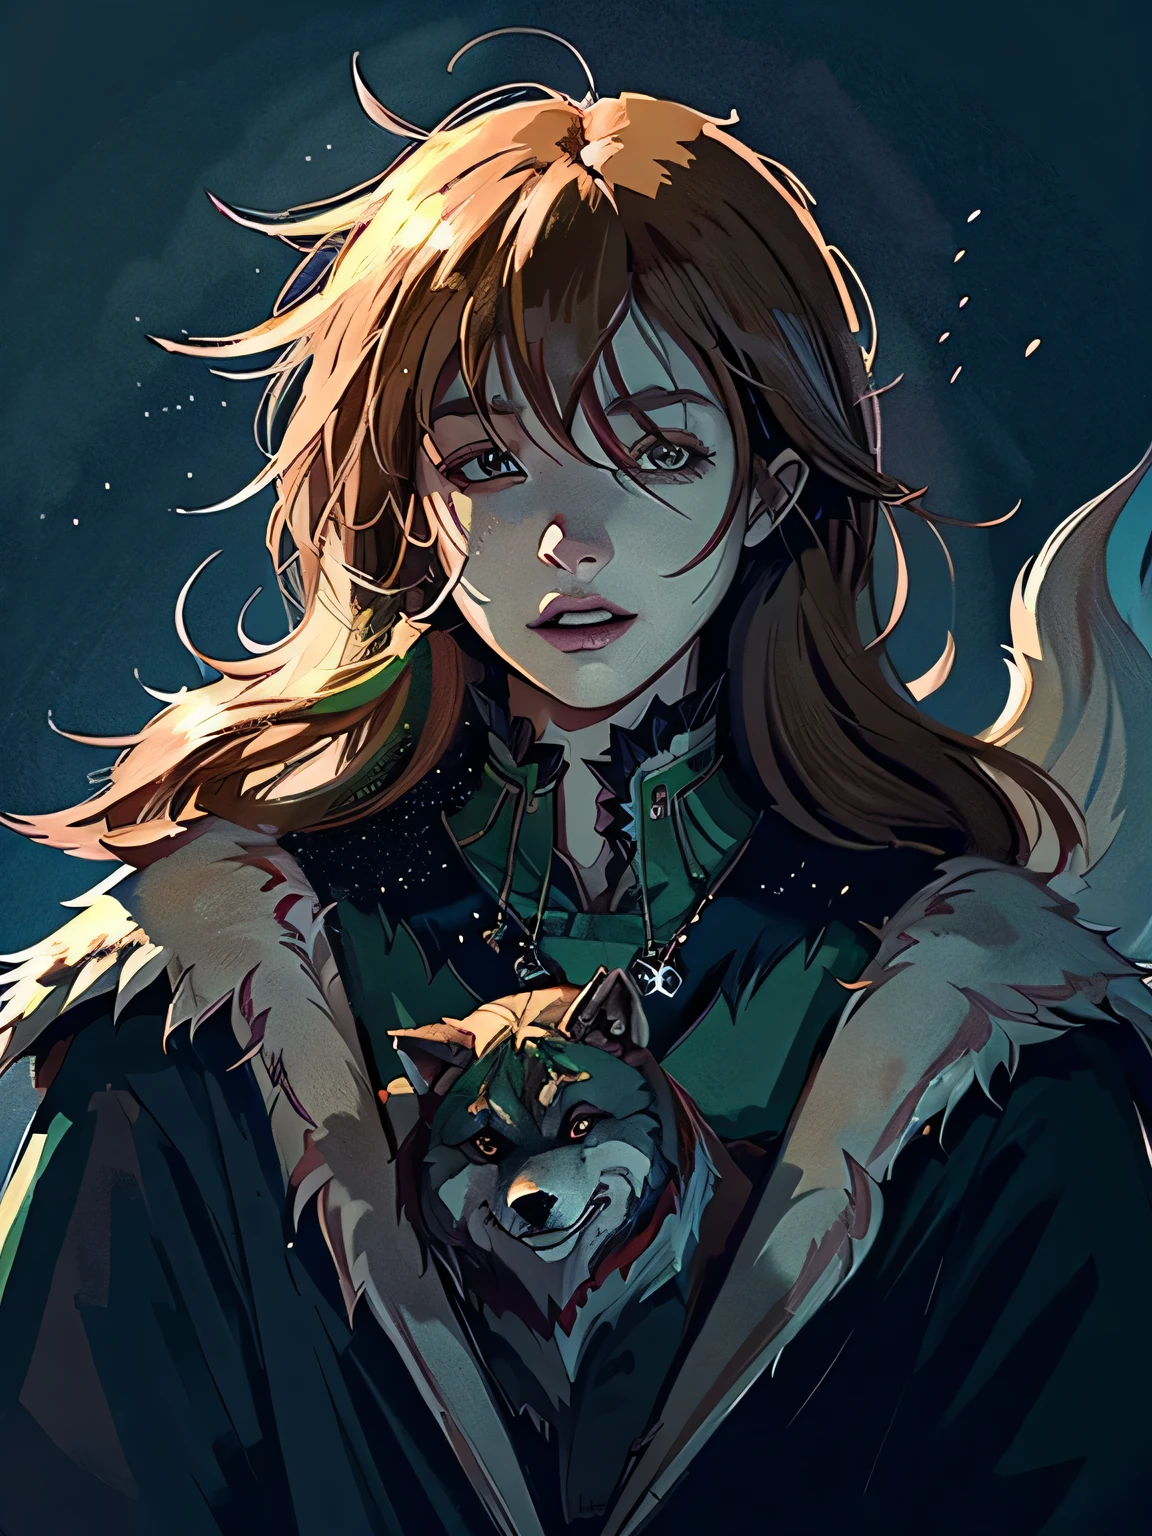 (((Illustration of one person and one wolf:1.3))), Sit on your knees, (((cry with a howl:1.2))), strict and fearless warrior, ornament armor, Cinematic Angle, While calling for rain, sharp looking eyes, Brown eyes, dark orange long hair, (((Shaggy hair:1.2))) wonderful wolf fur, sad night atmosphere, intricate oil paint illustration, dark fantasy landscape background, (smooth, beautiful and glowing skin:1.1), High quality, Stunning 16K detailed rendering, fantasy00d,